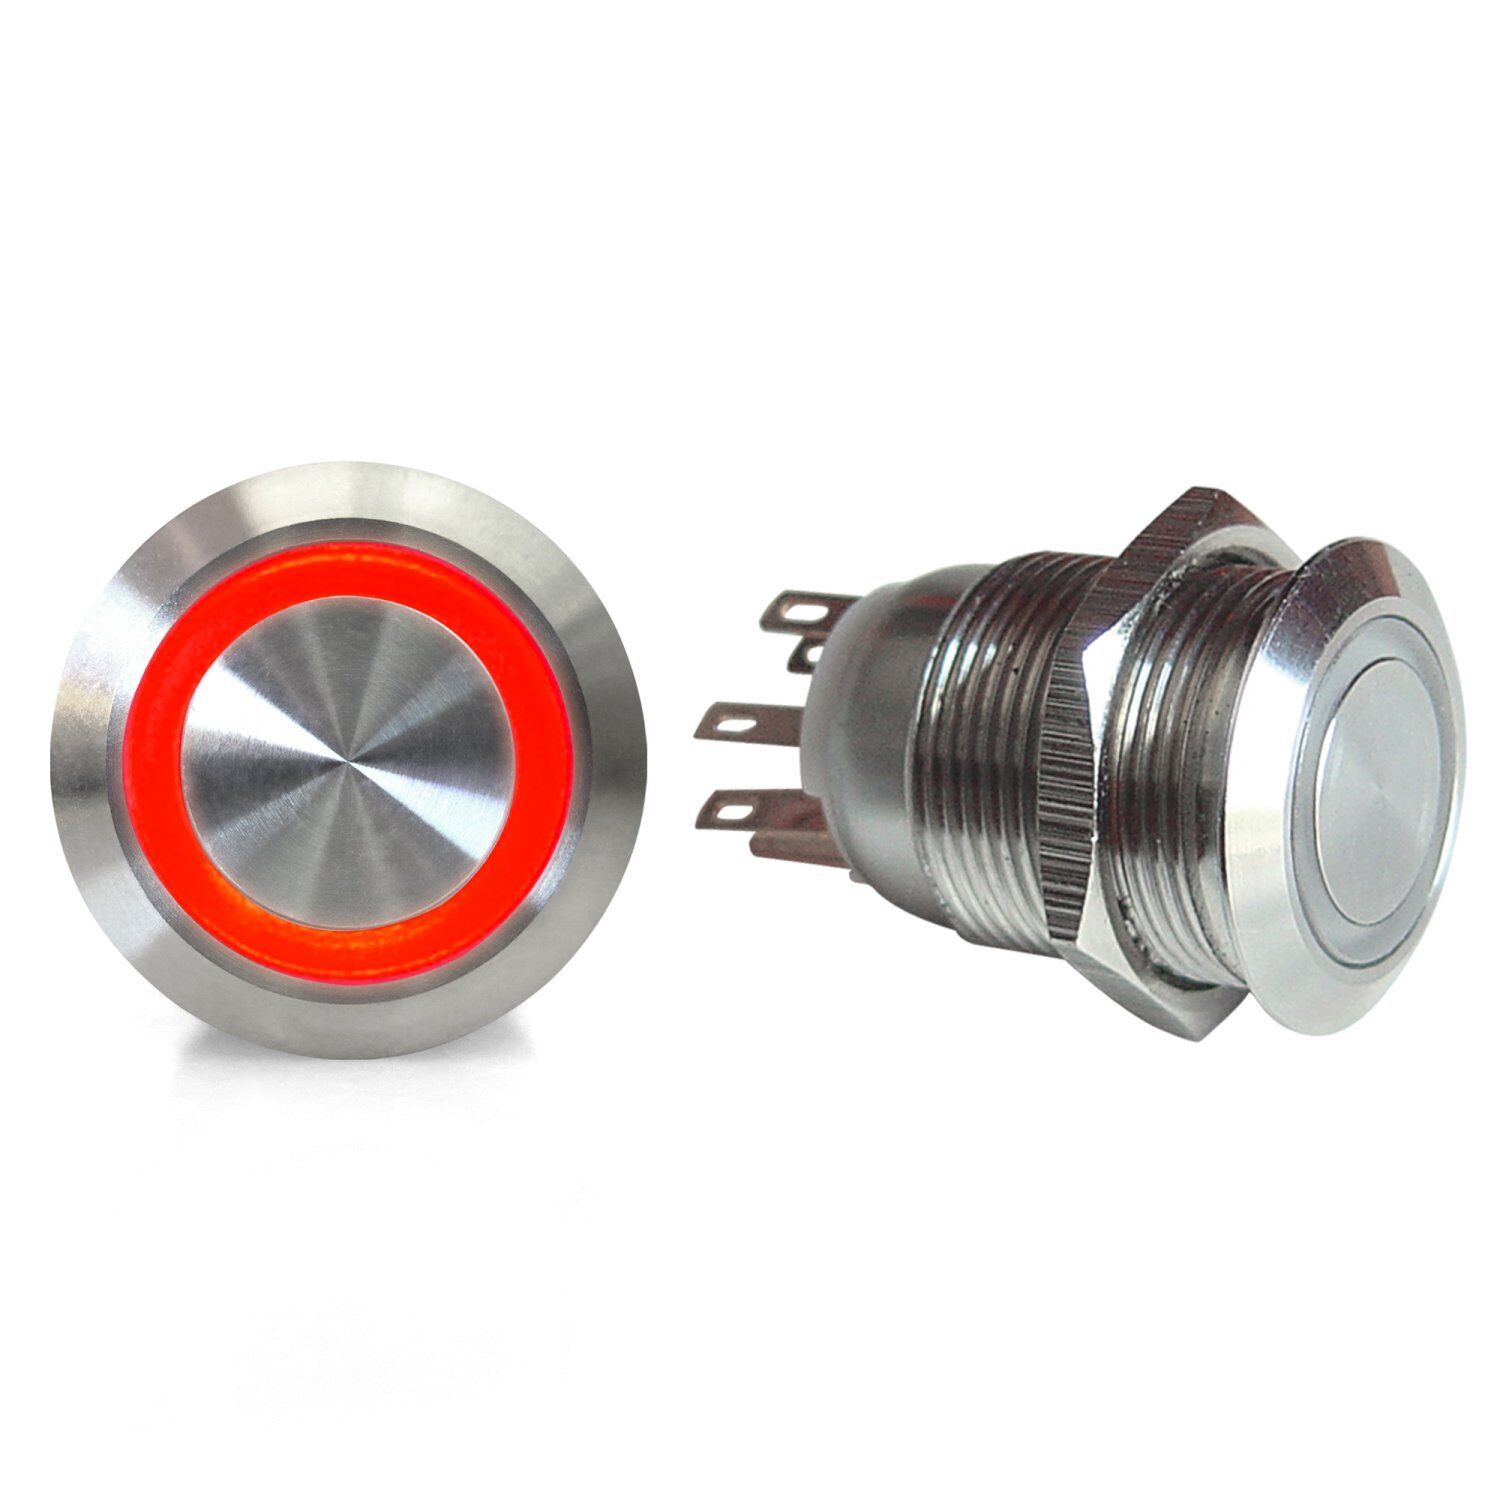 19mm Latching Billet Button with LED Red Ring SW43R hot rod rat truck